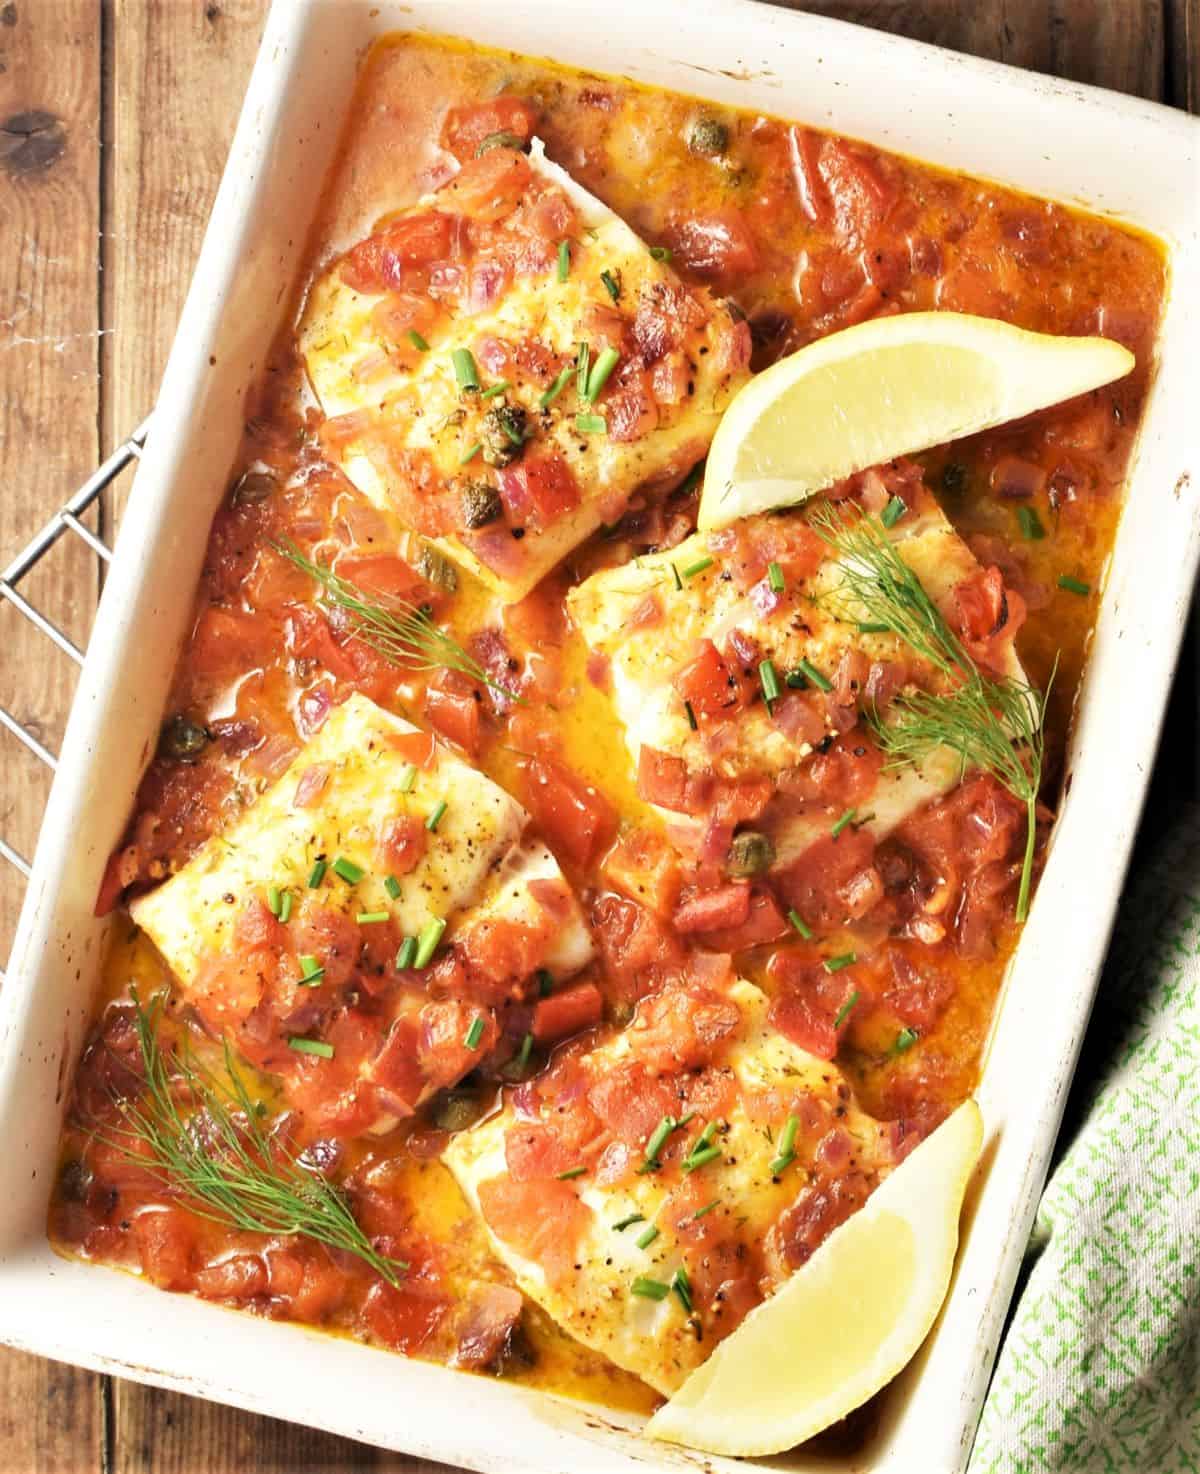 Fish pieces and lemon wedges with tomato sauce in casserole dish.